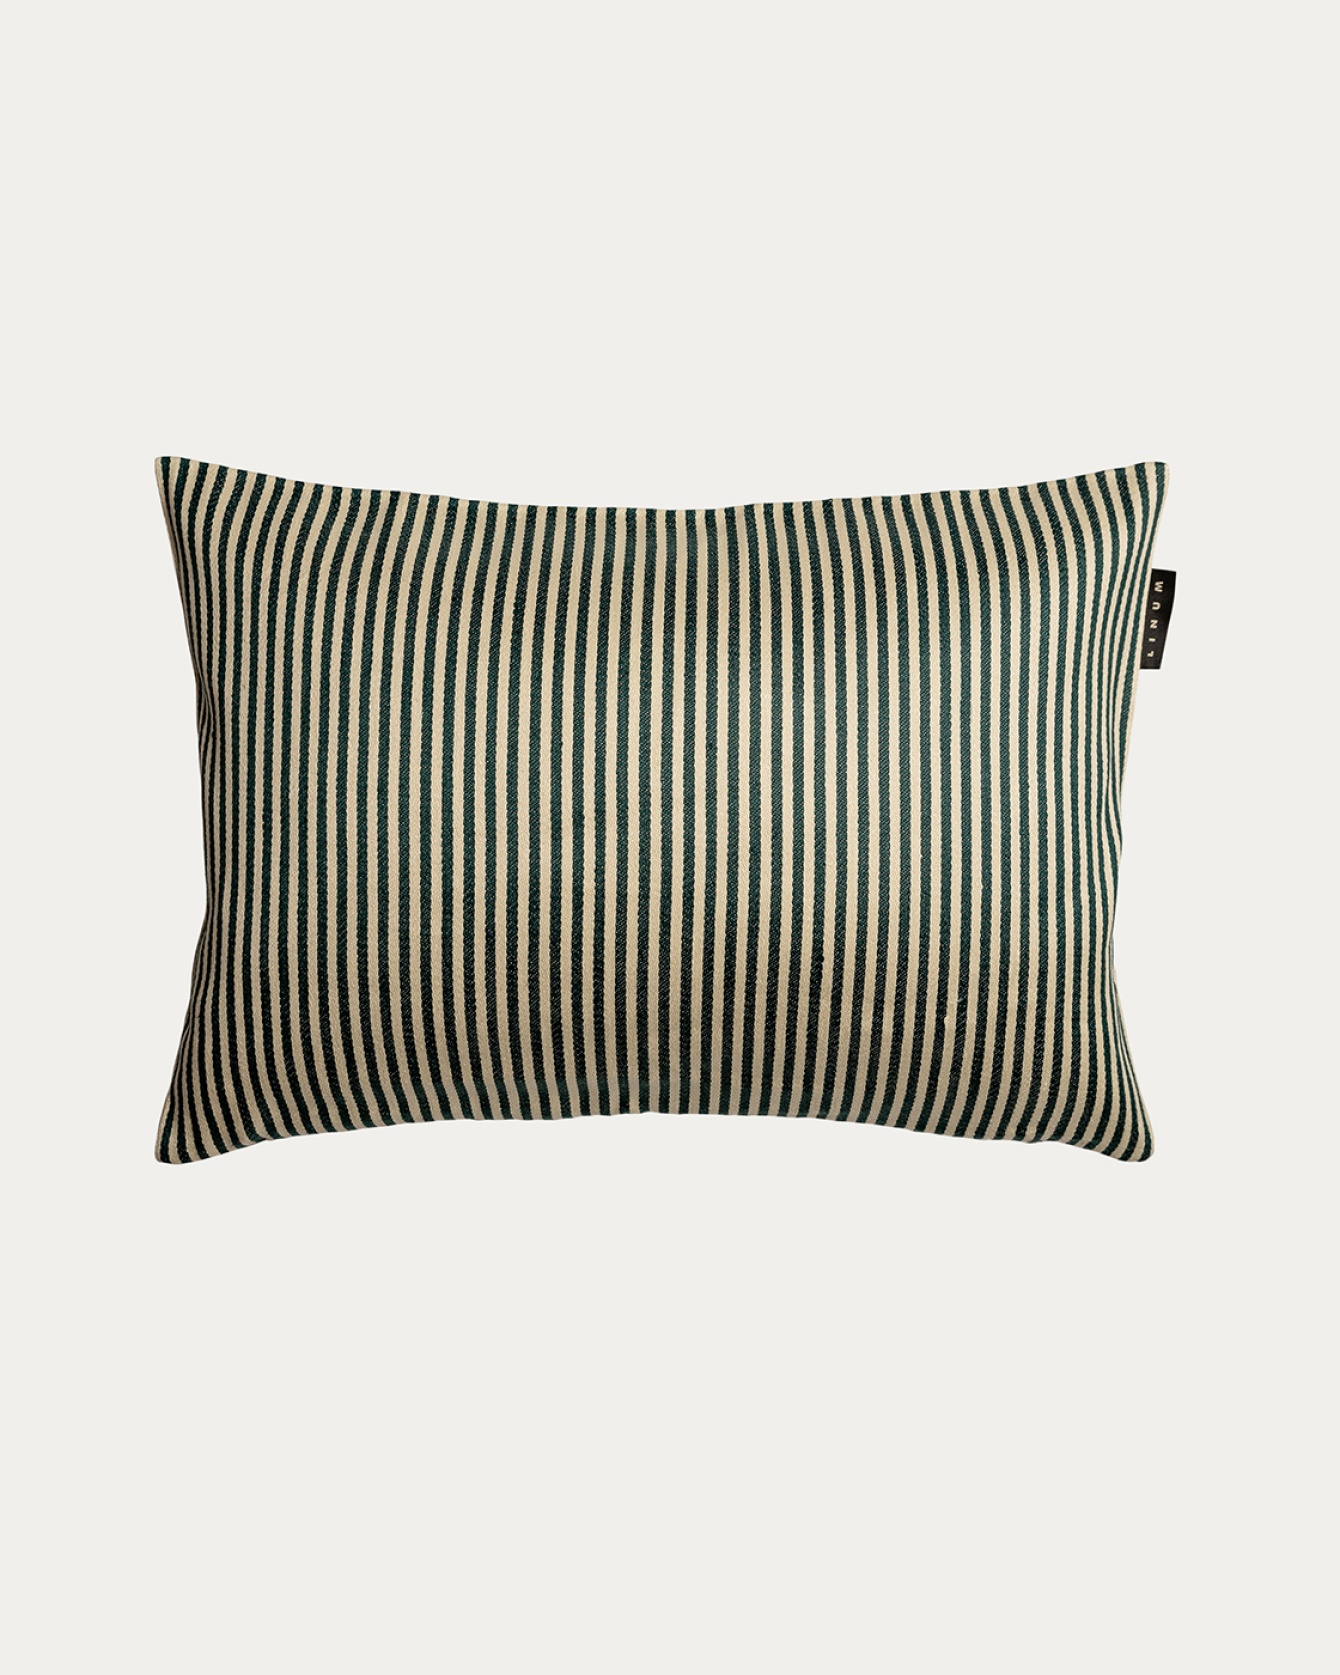 Product image deep emerald green CALCIO cushion cover with thin stripes of 77% linen and 23% cotton from LINUM DESIGN. Size 35x50 cm.